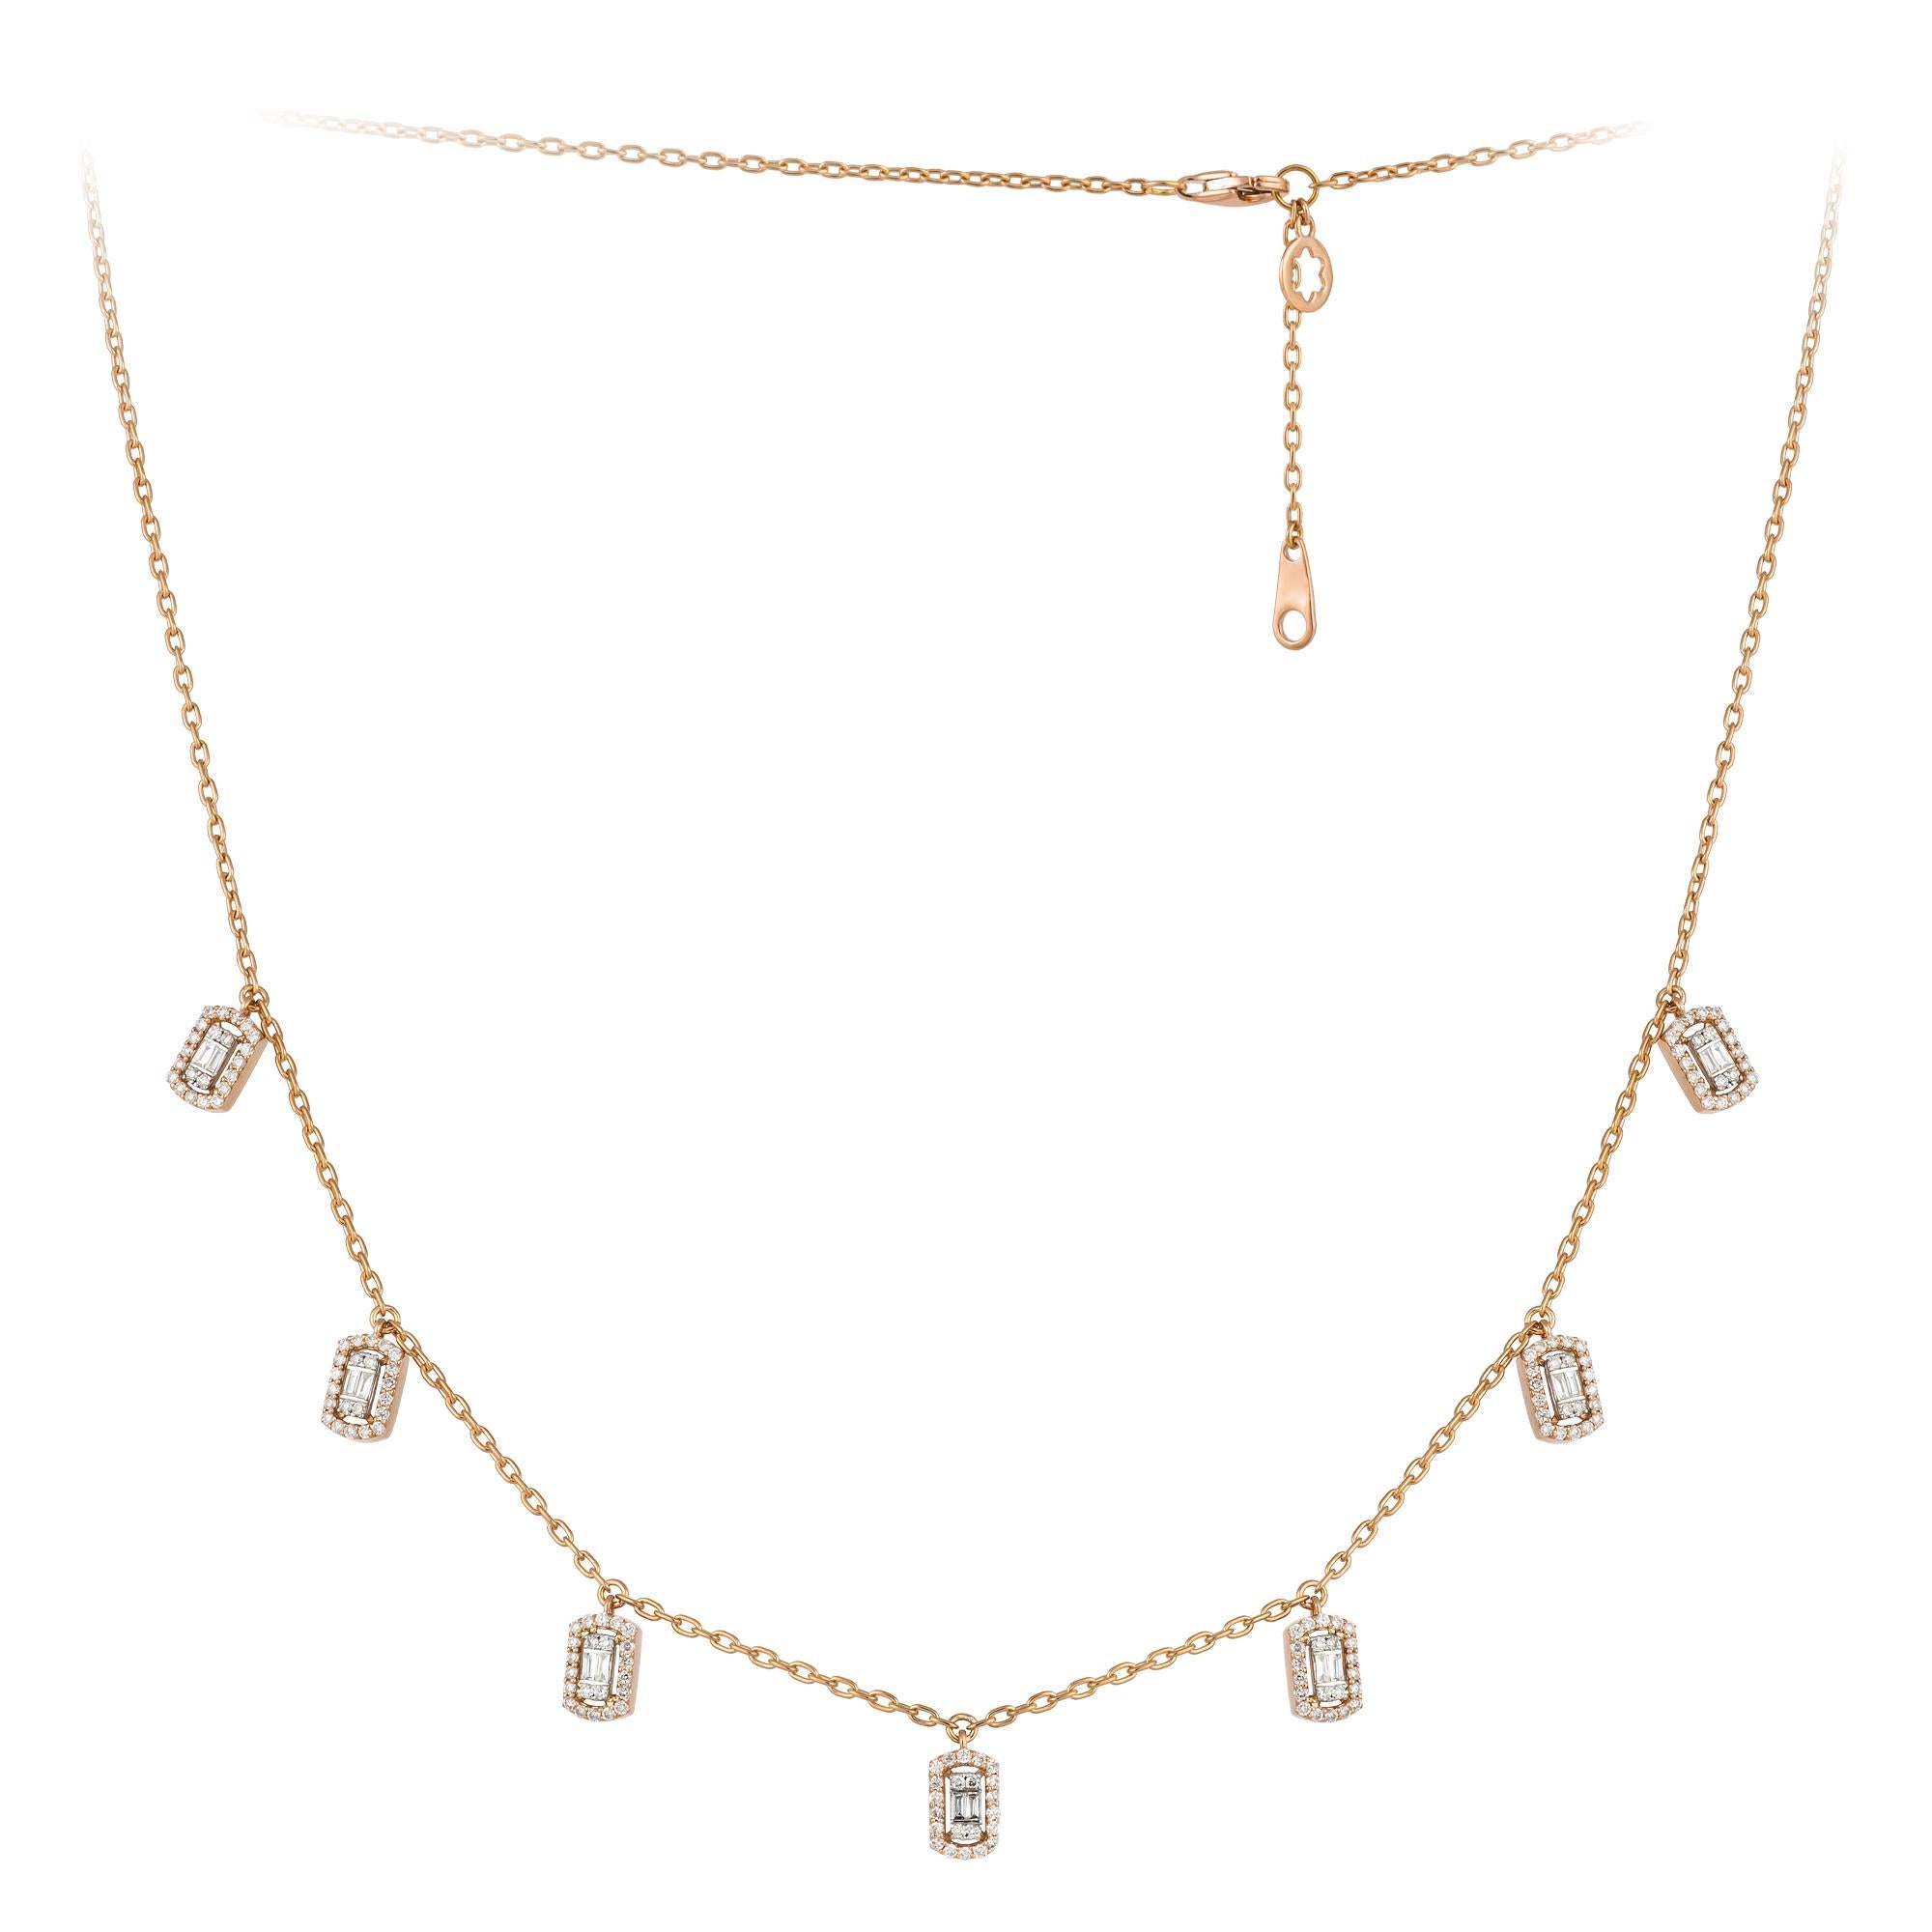 NECKLACE 18K White/Pink Gold Diamond 0.65 Cts/154 Pcs Tapered Baguette 0.15 Cts/14 Pcs
